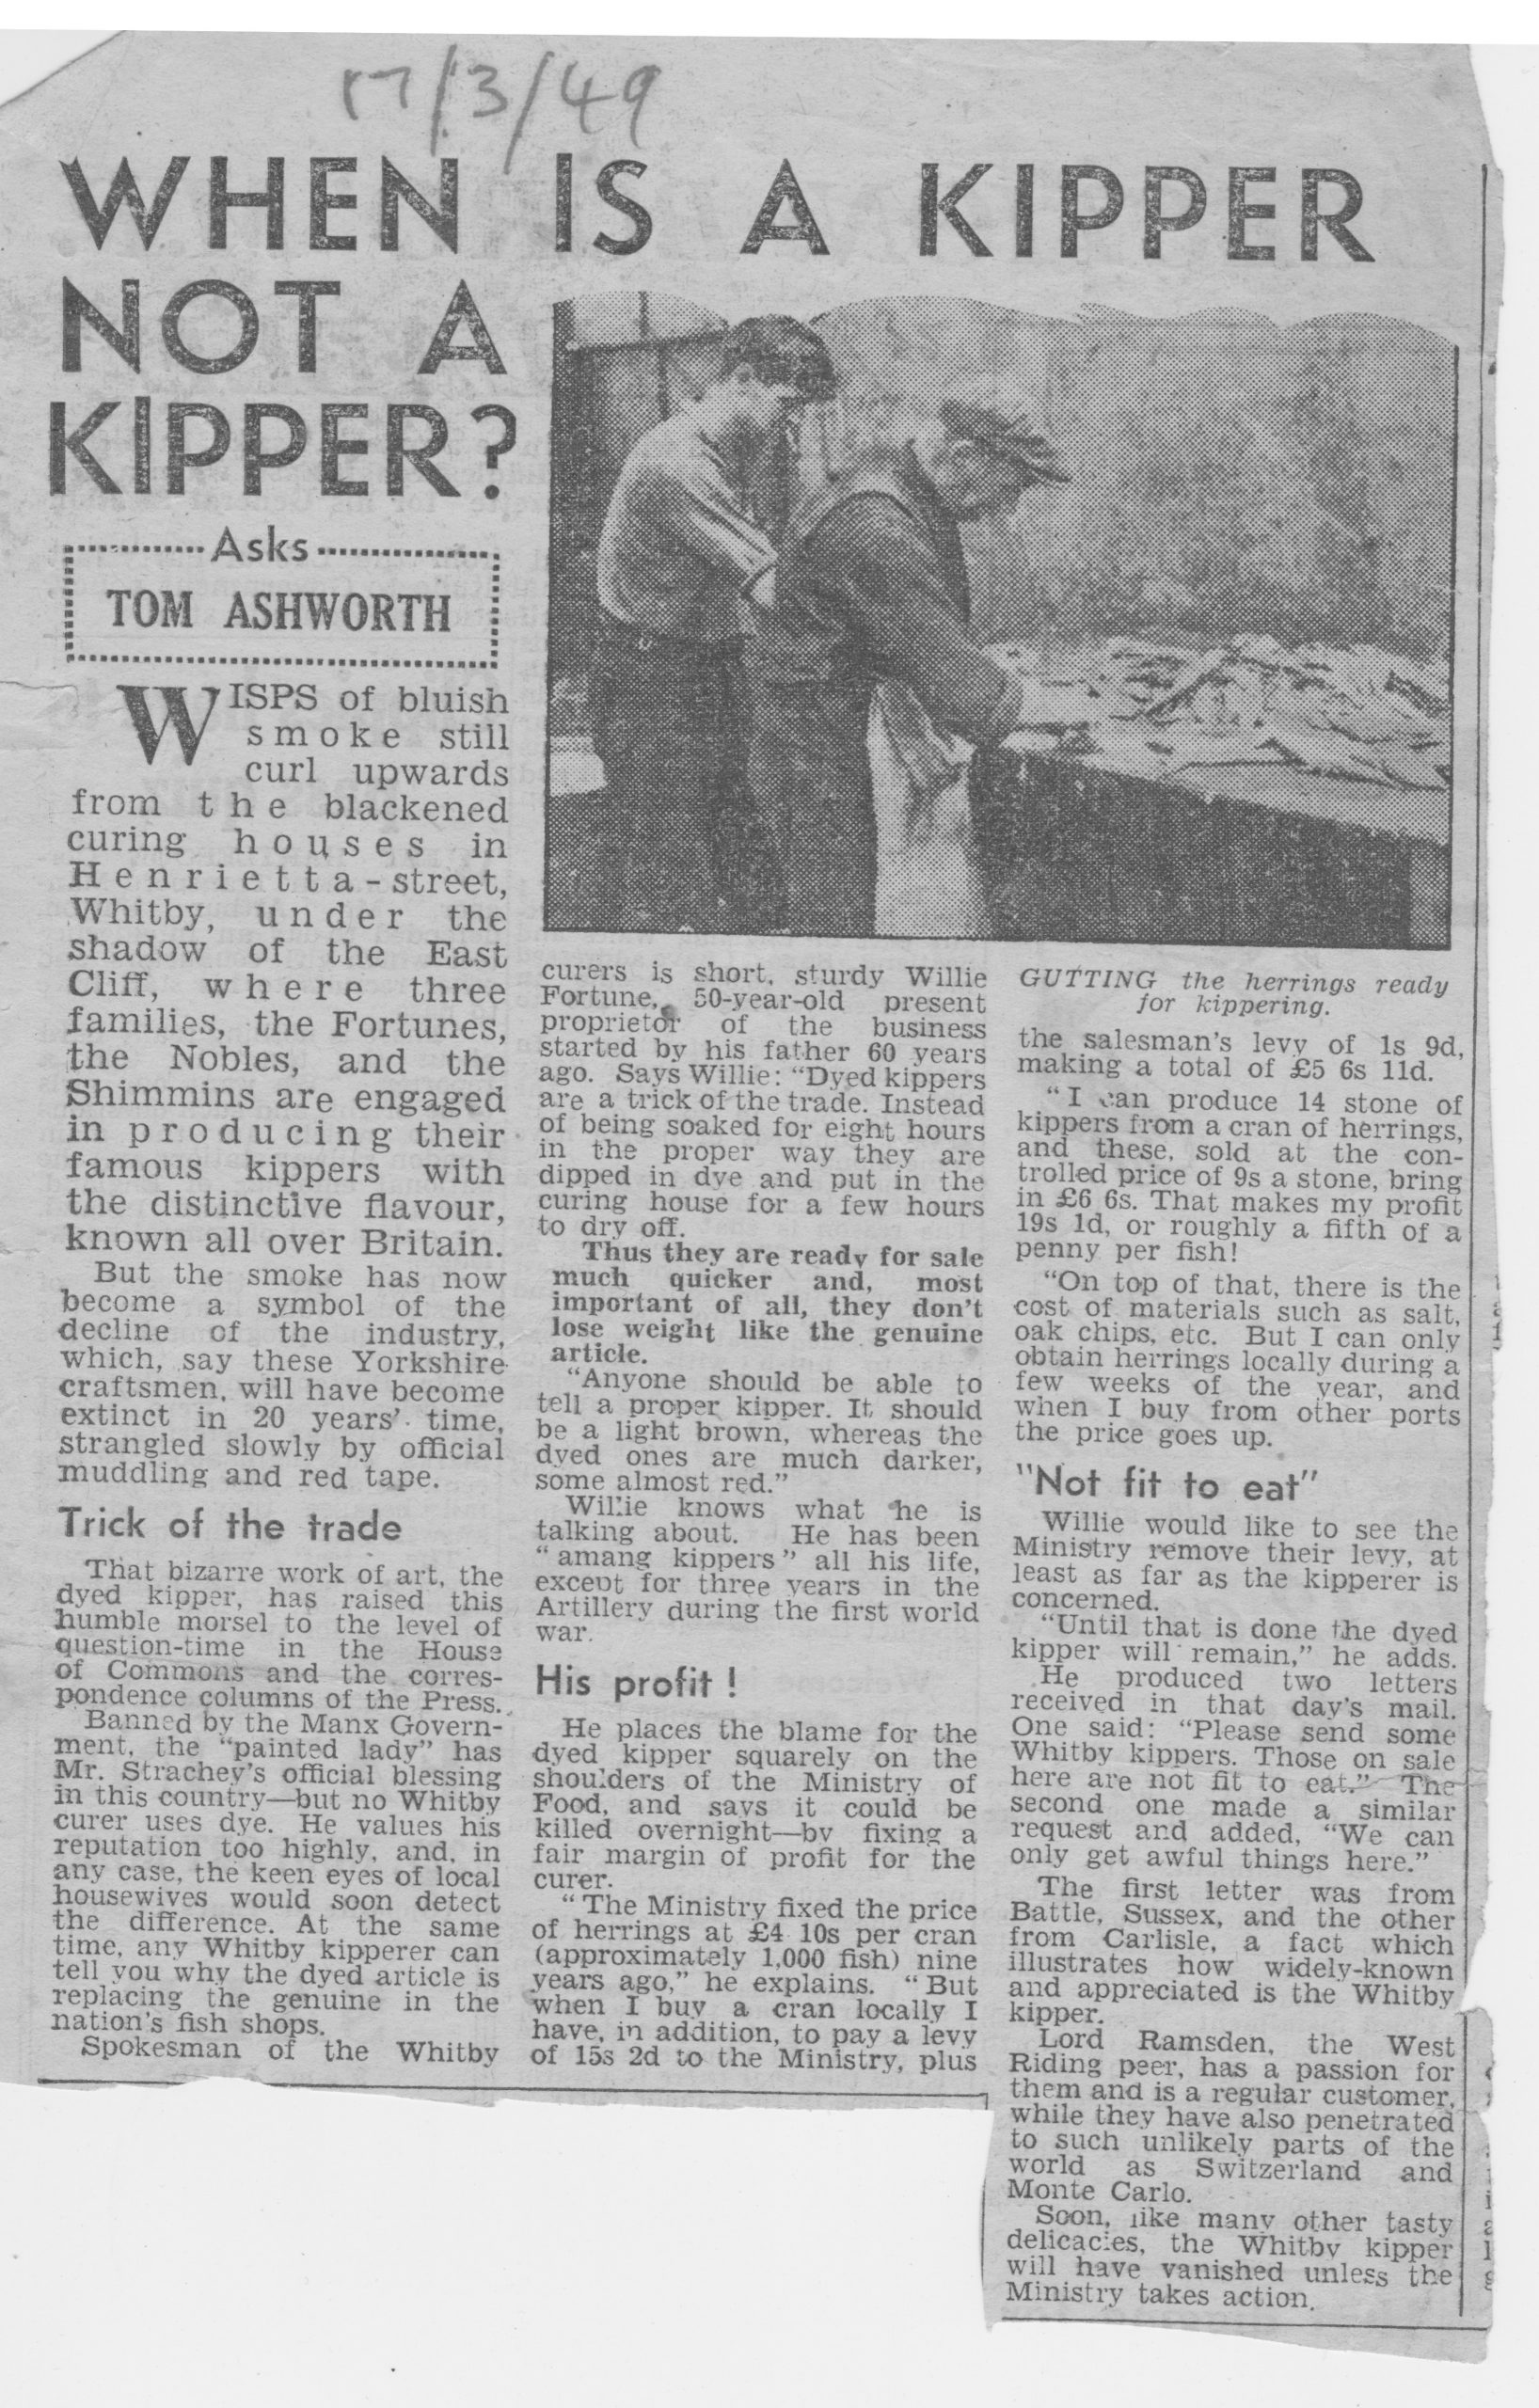 Feature article about Whitby kipper smoking